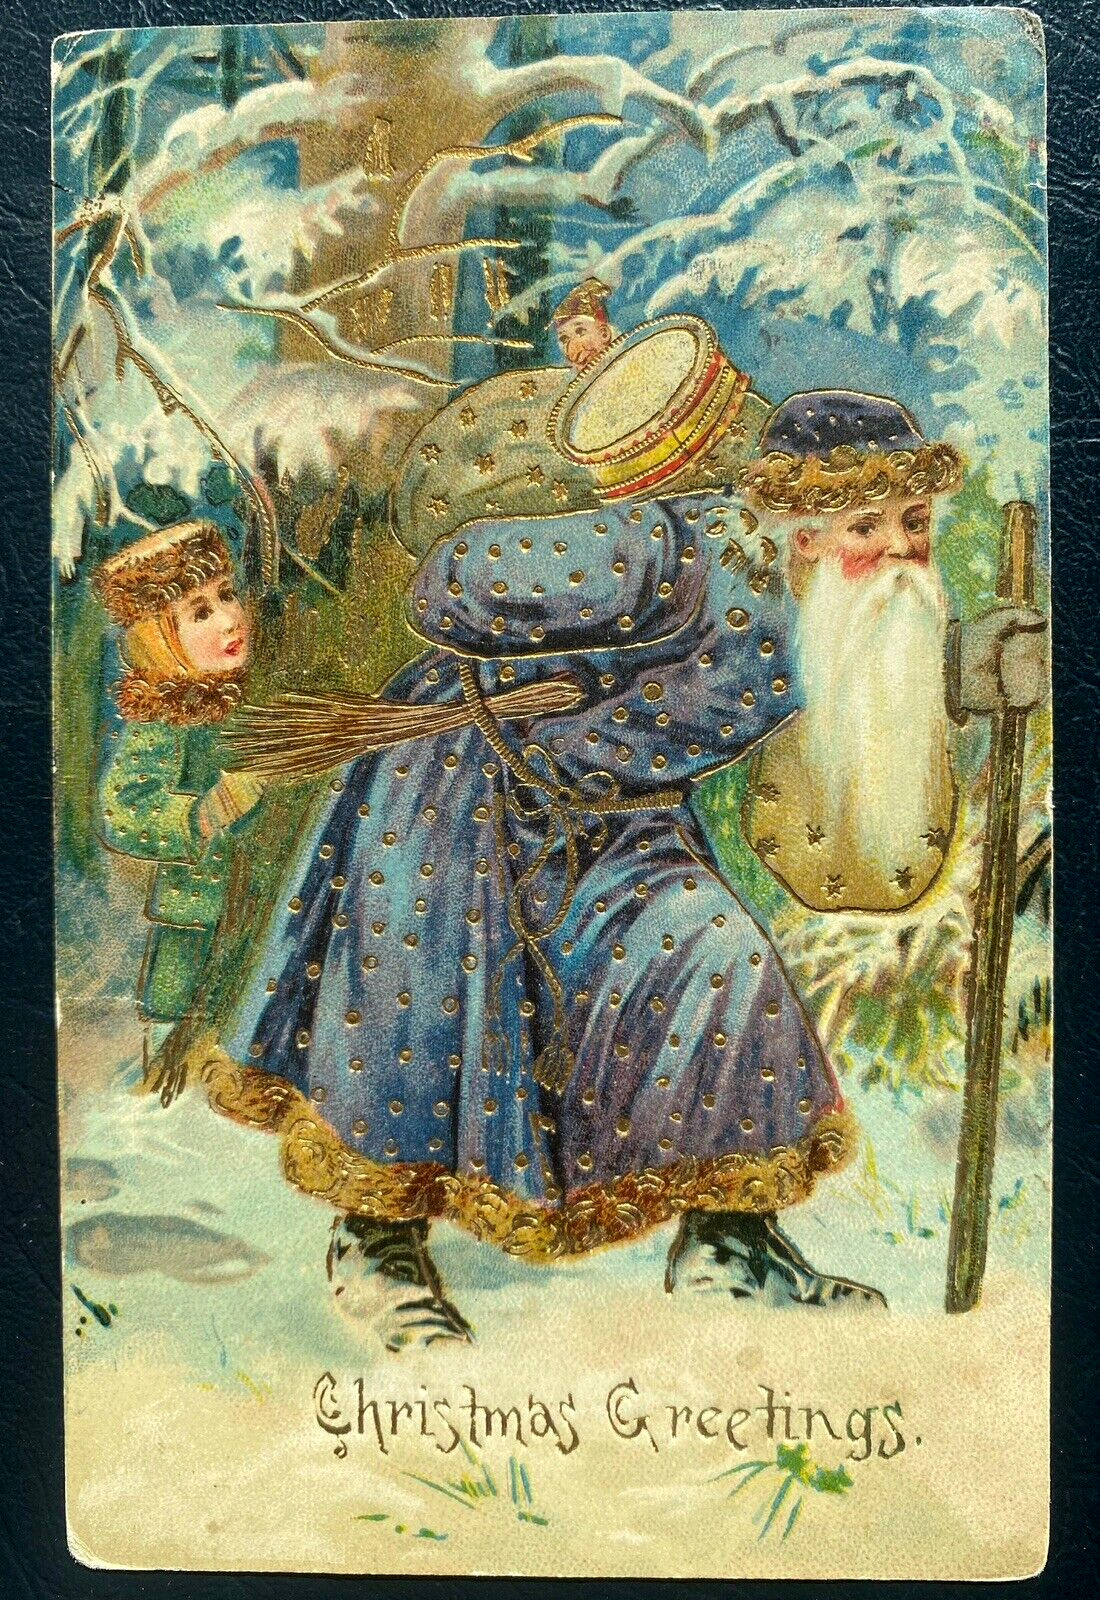 Fancy Blue Robe Santa Claus in Snow with Child~Toys~Christmas  Postcard ~k281